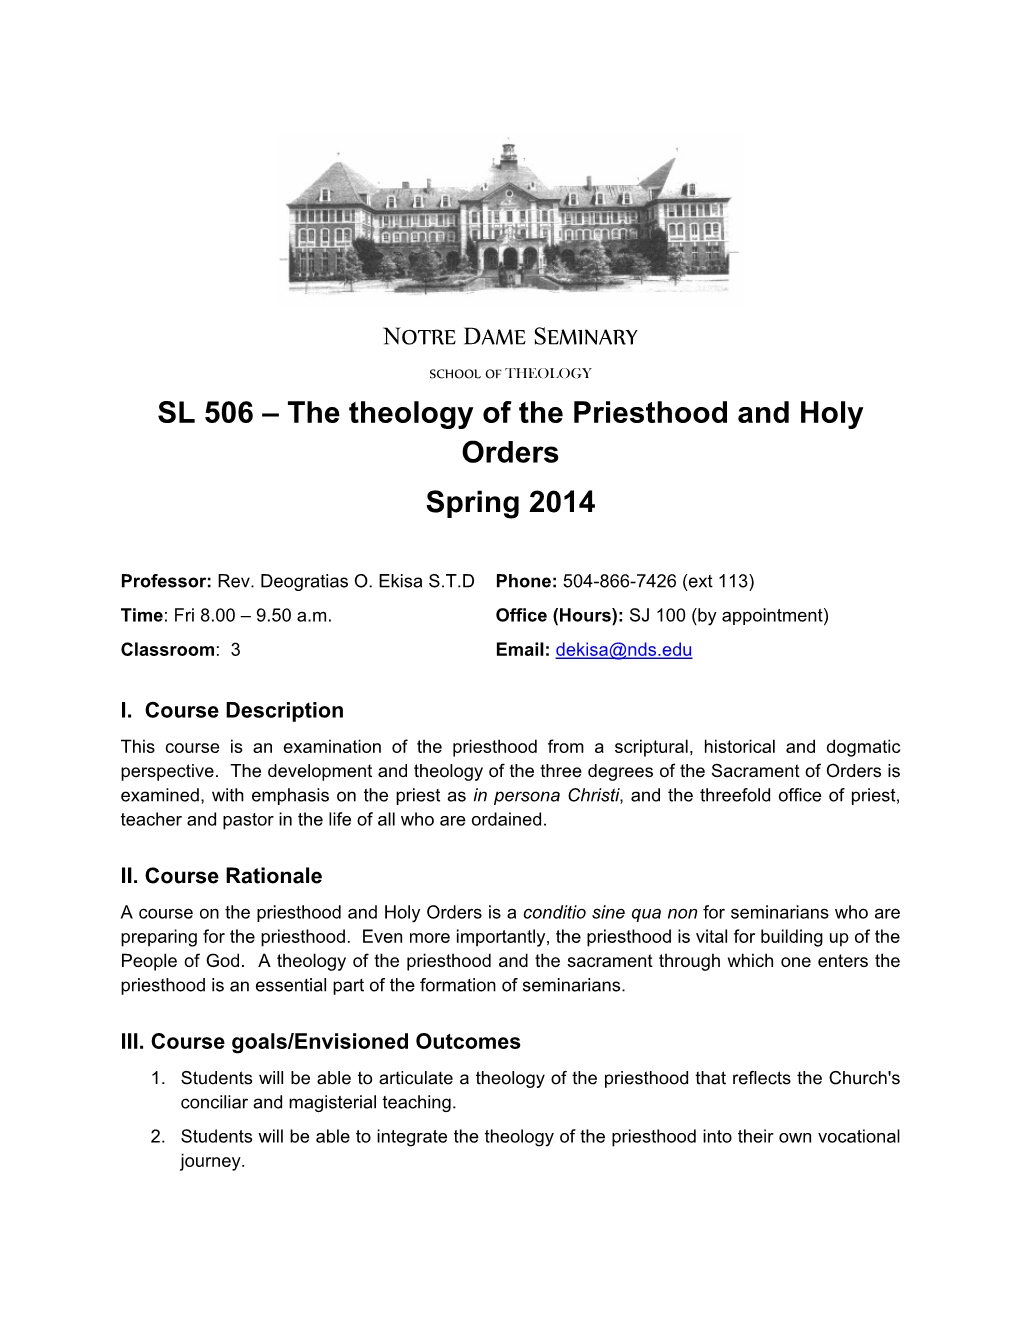 SL 506 – the Theology of the Priesthood and Holy Orders Spring 2014